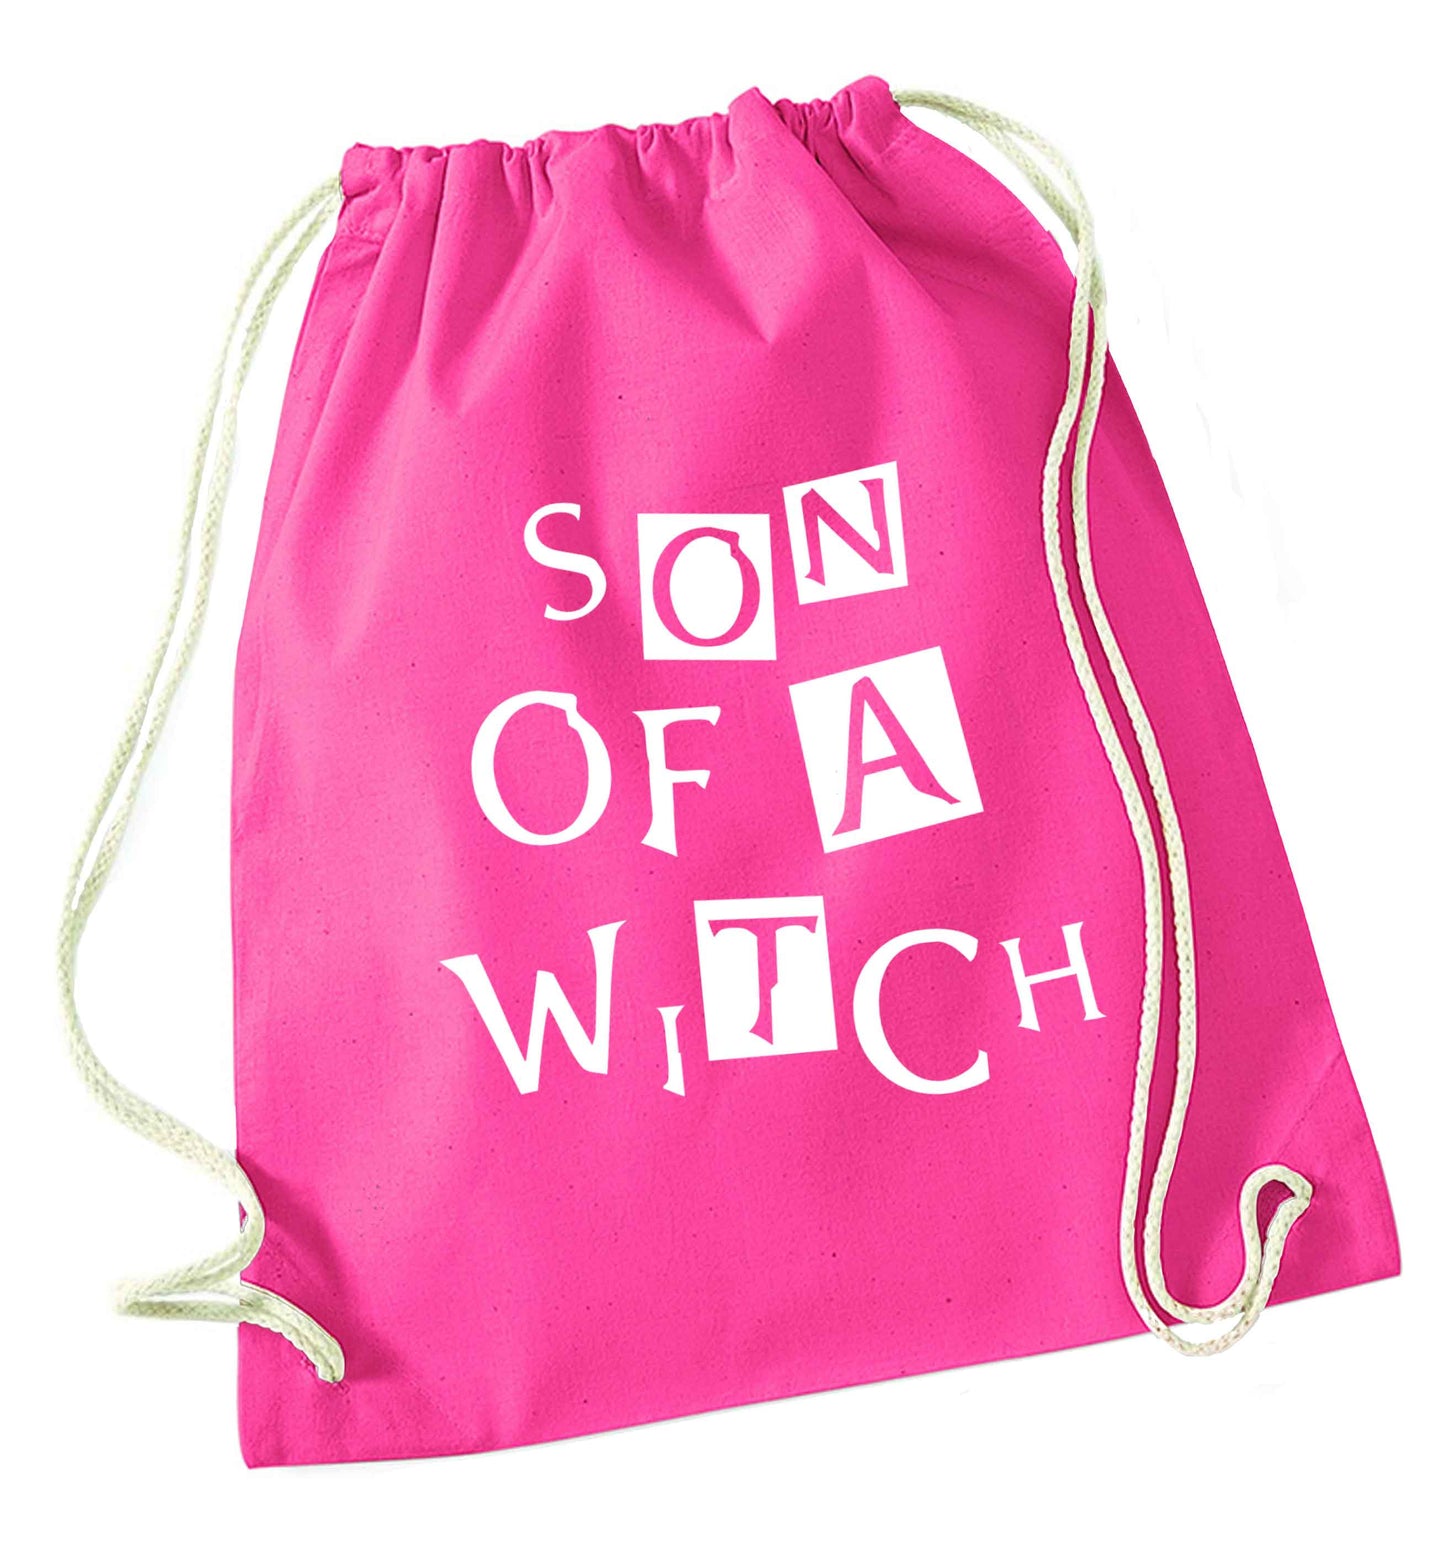 Son of a witch pink drawstring bag